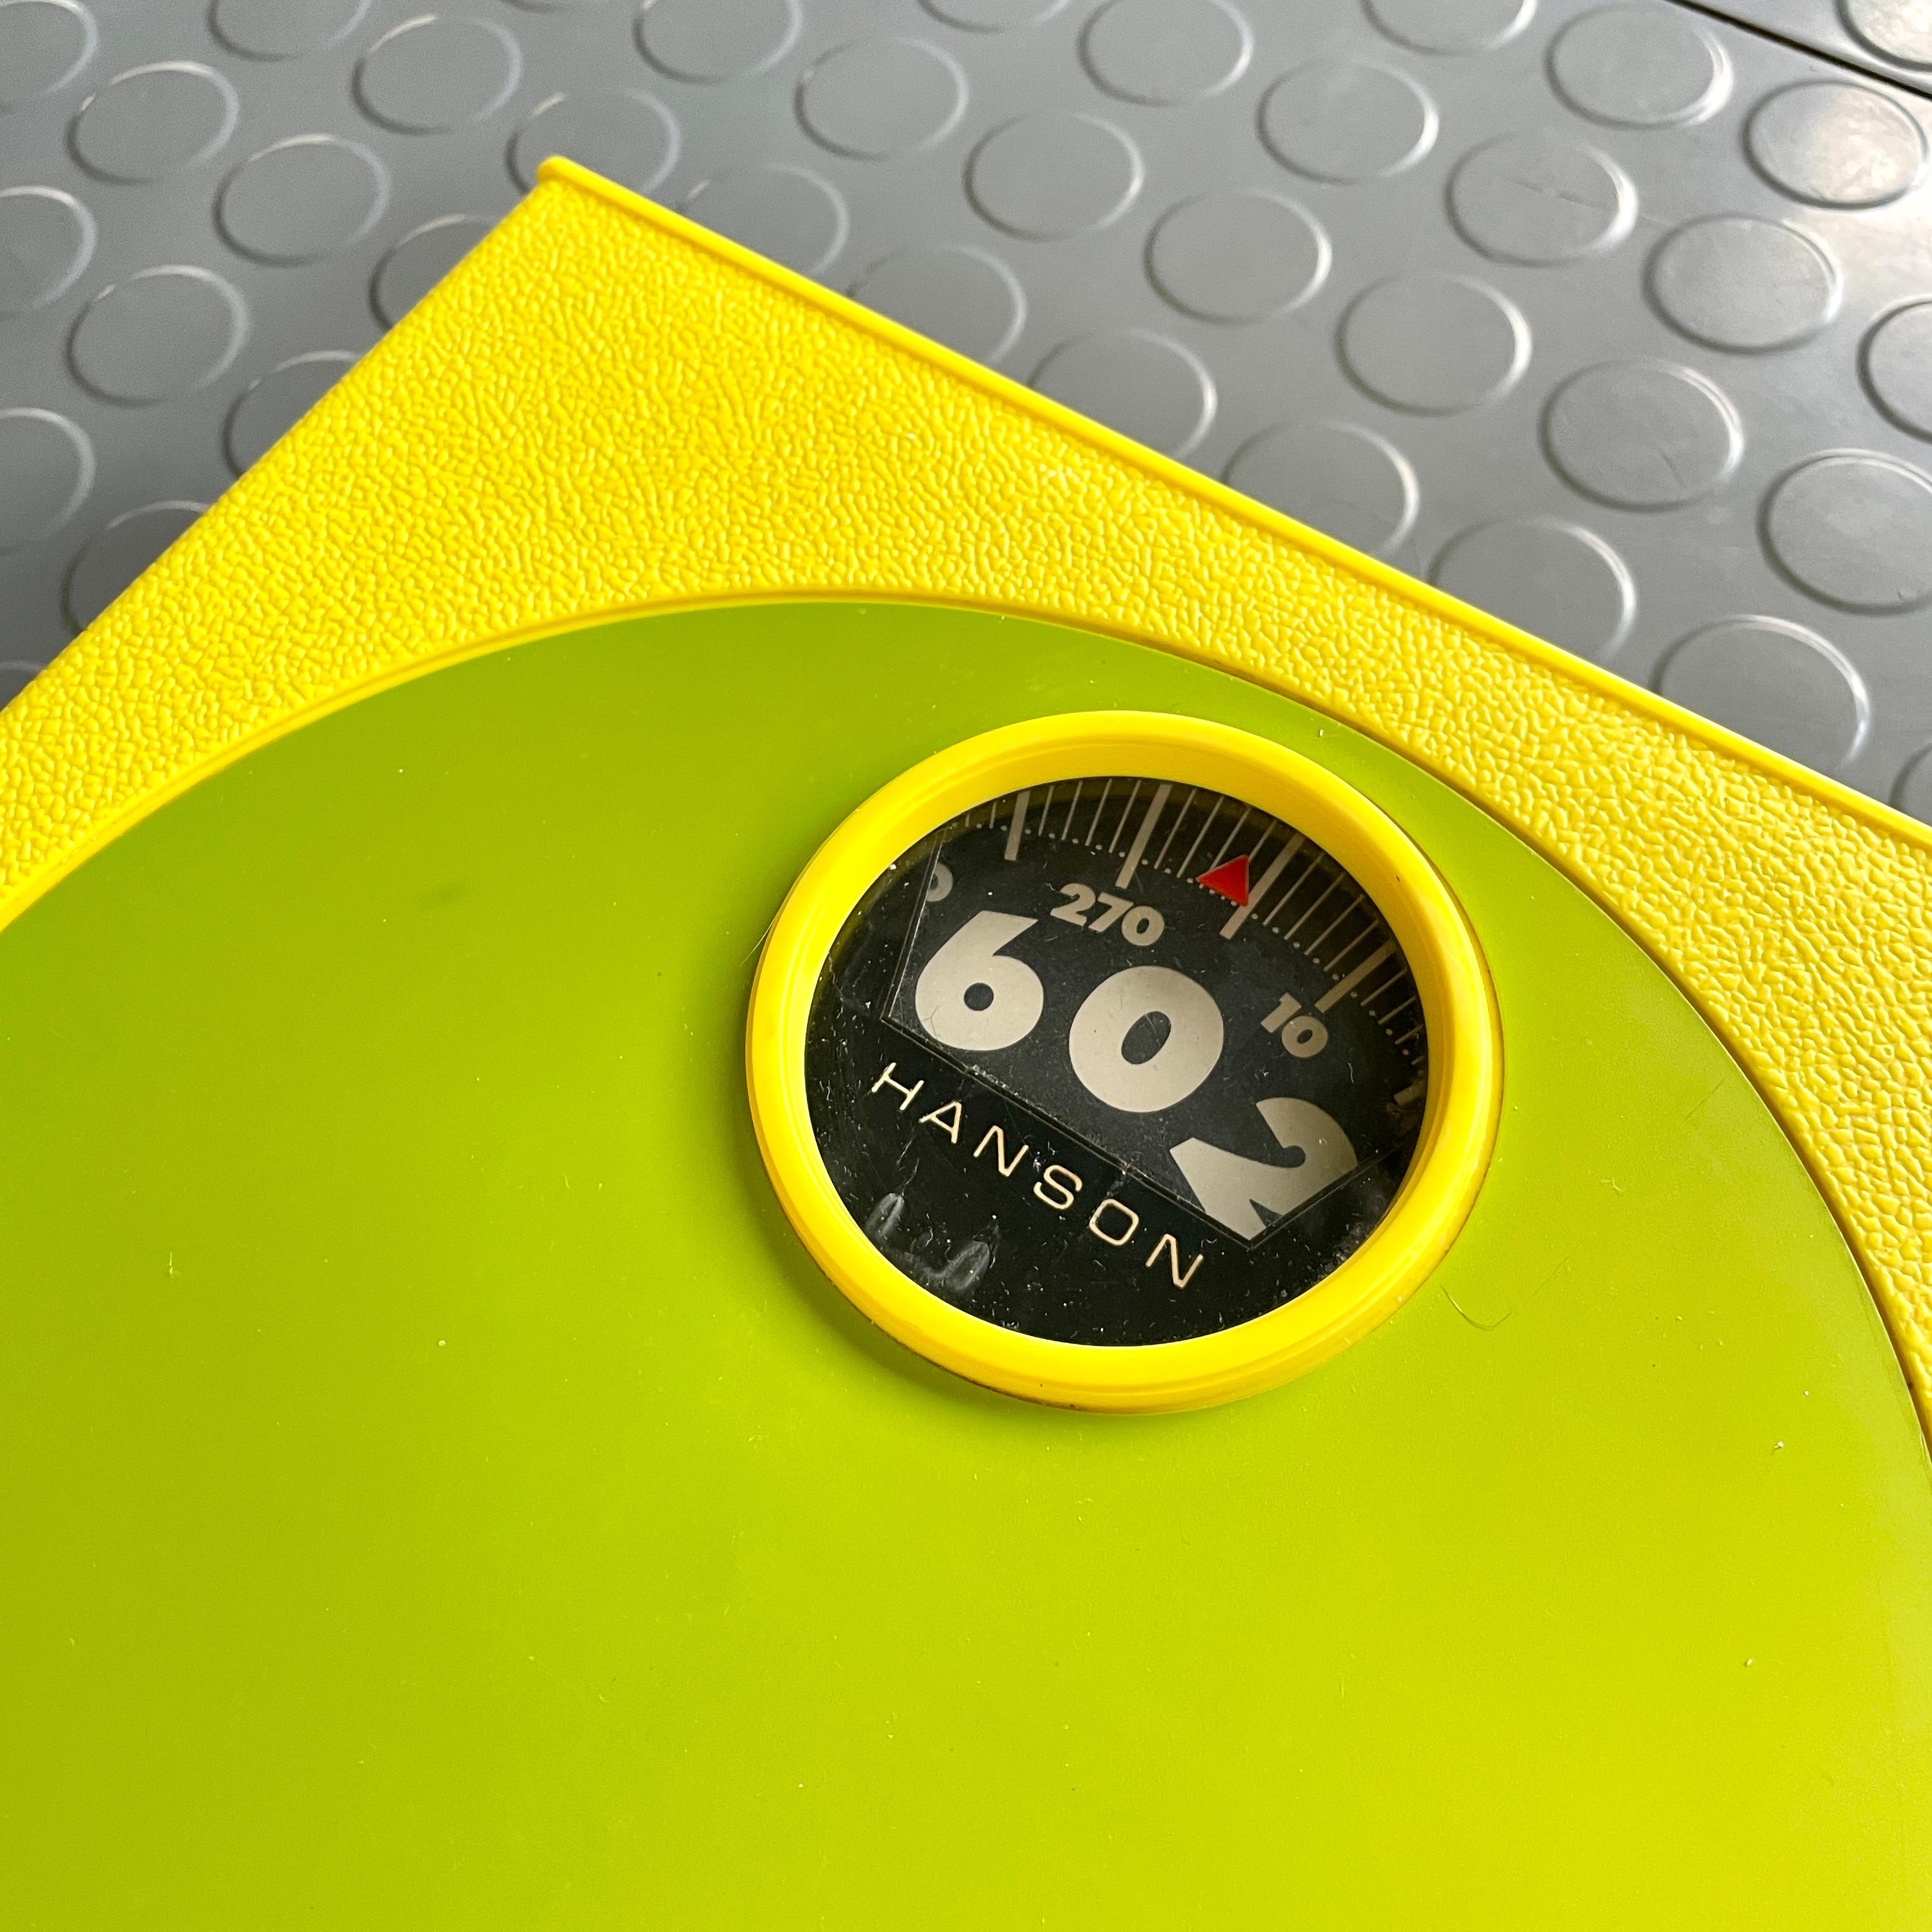 Machine-Made 1960s Bathroom Scale by Hanson in Lemon Yellow Lime Green Dot Mid-Century Mod For Sale